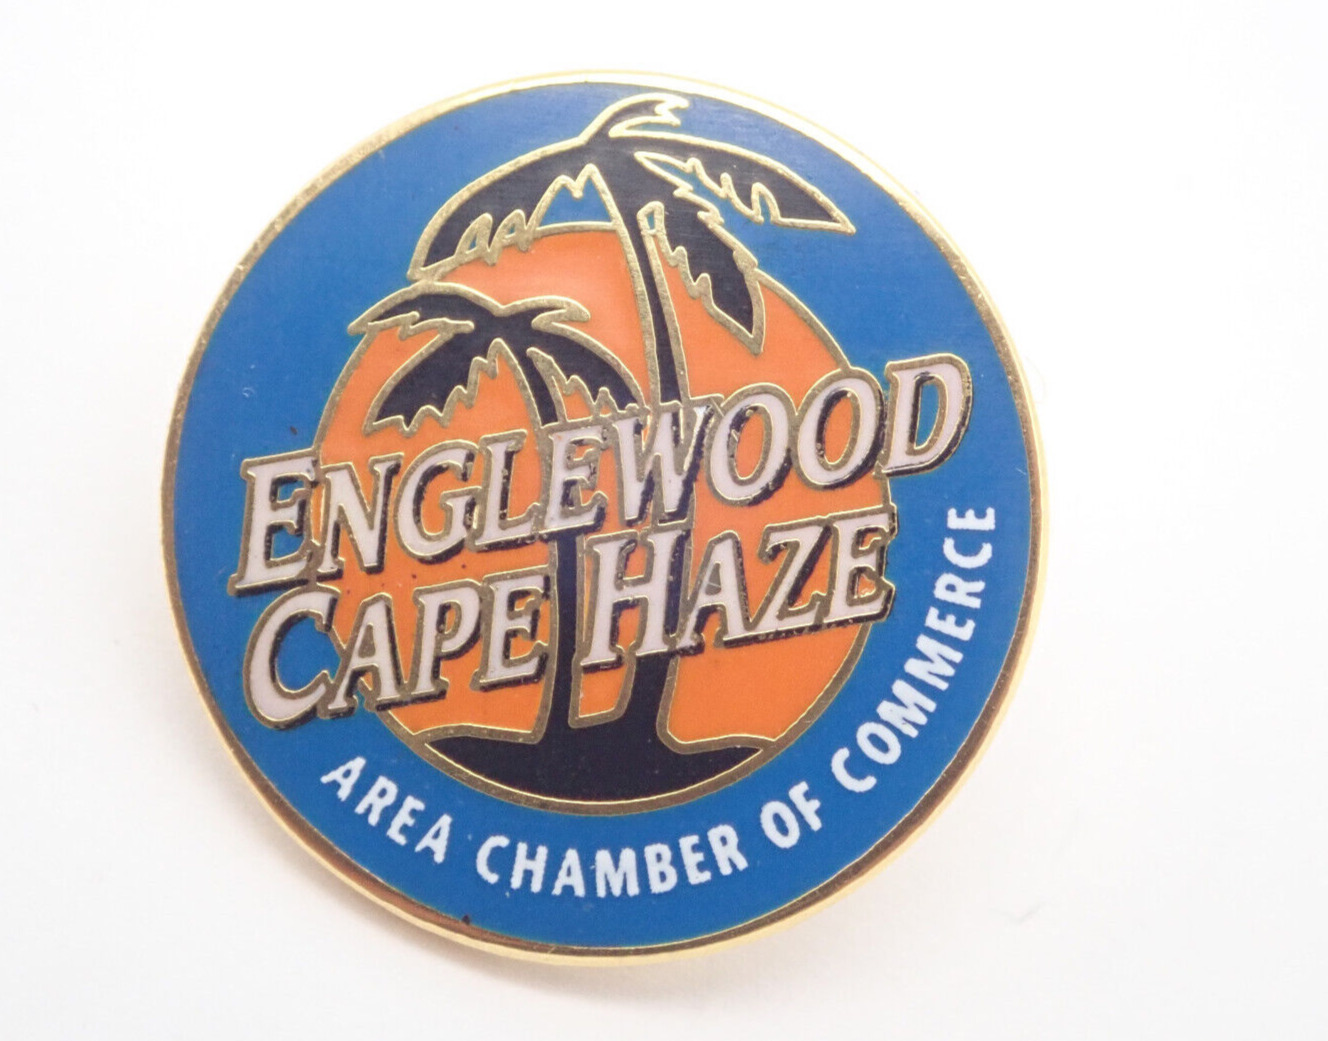 Engelwood Cape Haze Area Chamber of Commerce Vintage Lapel Pin